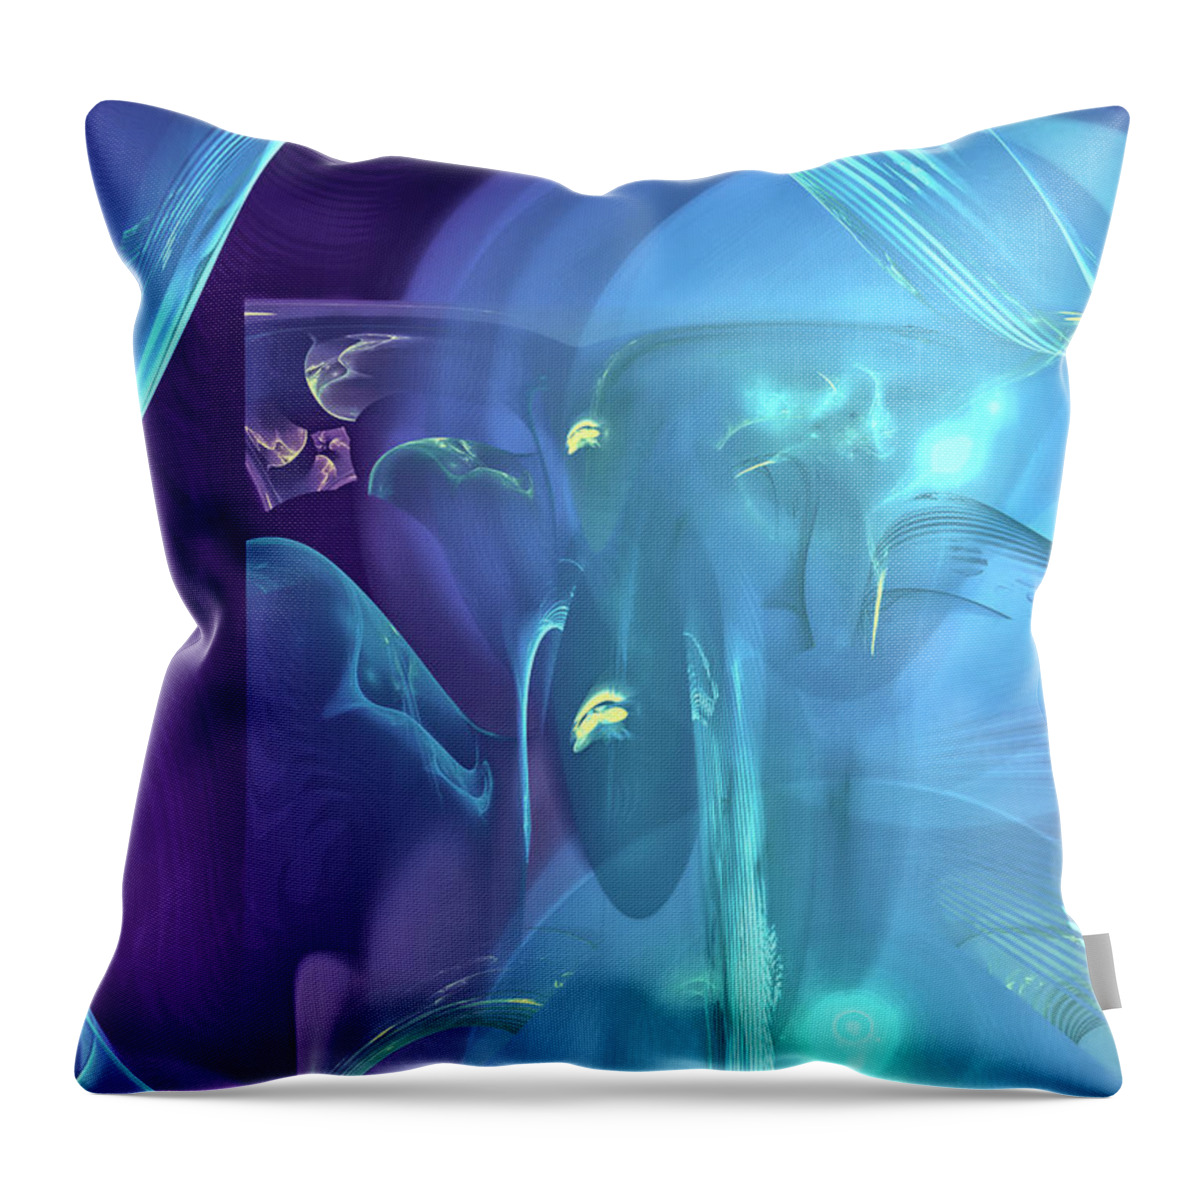 Art Throw Pillow featuring the digital art Behind the Myth by Jeff Iverson